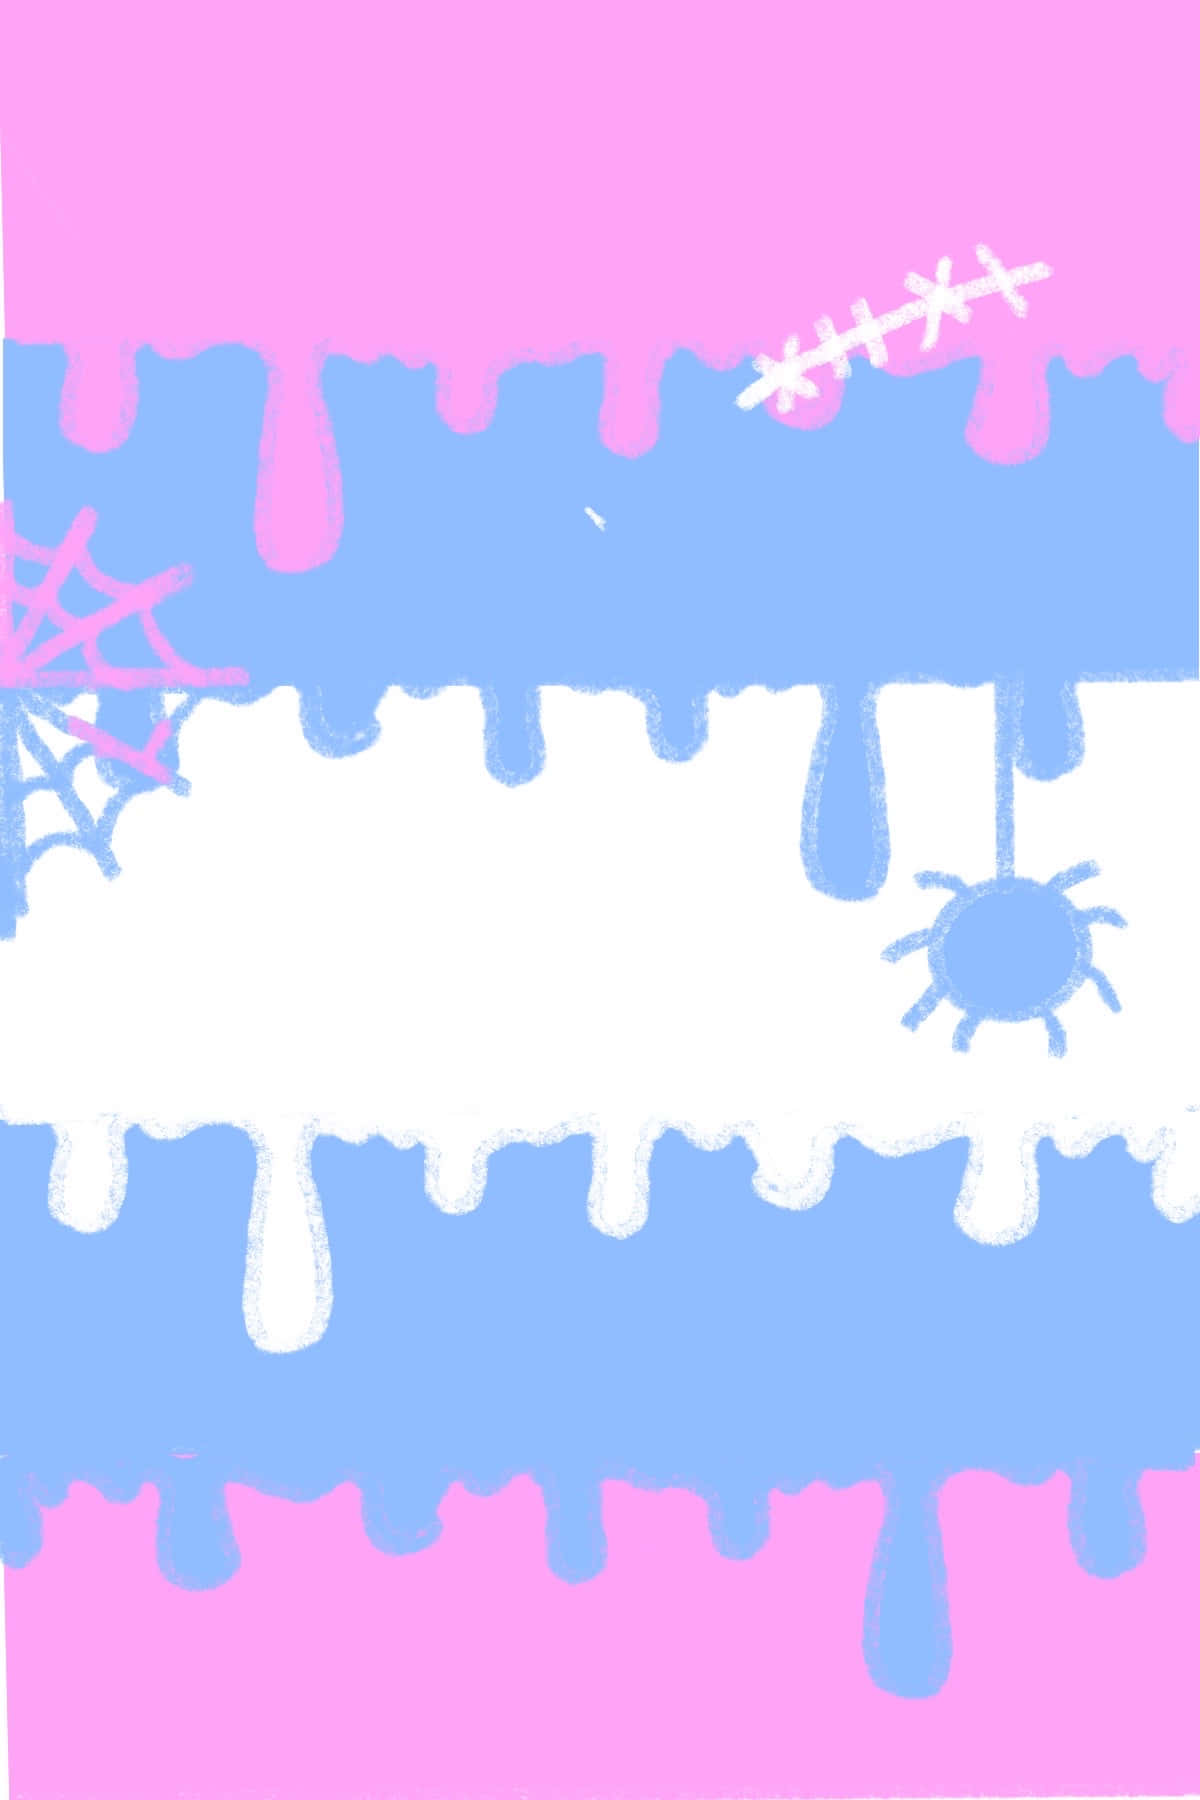 A Pink And Blue Background With A Spider And Spider Web Wallpaper